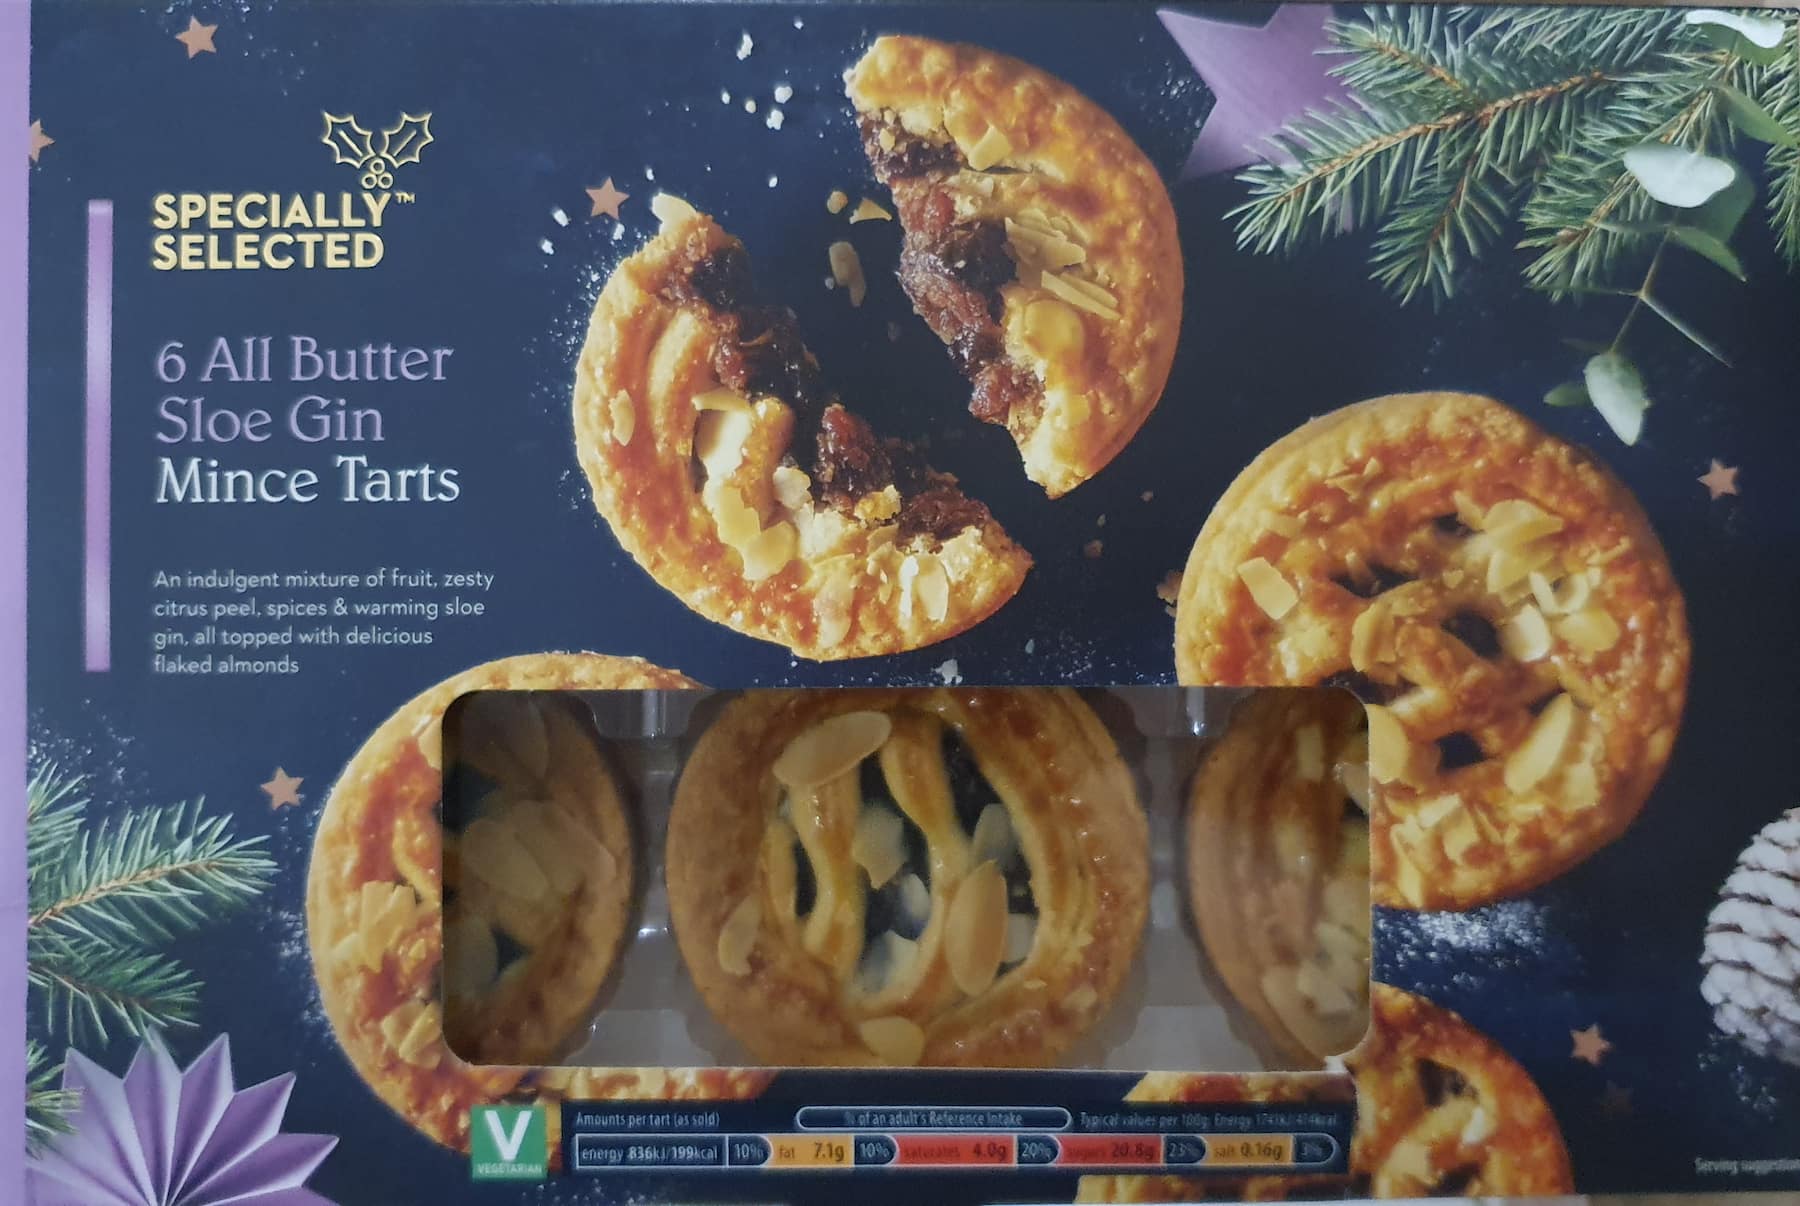 Aldi Specially Selected All Butter Sloe Gin Mince Tart Review 2021